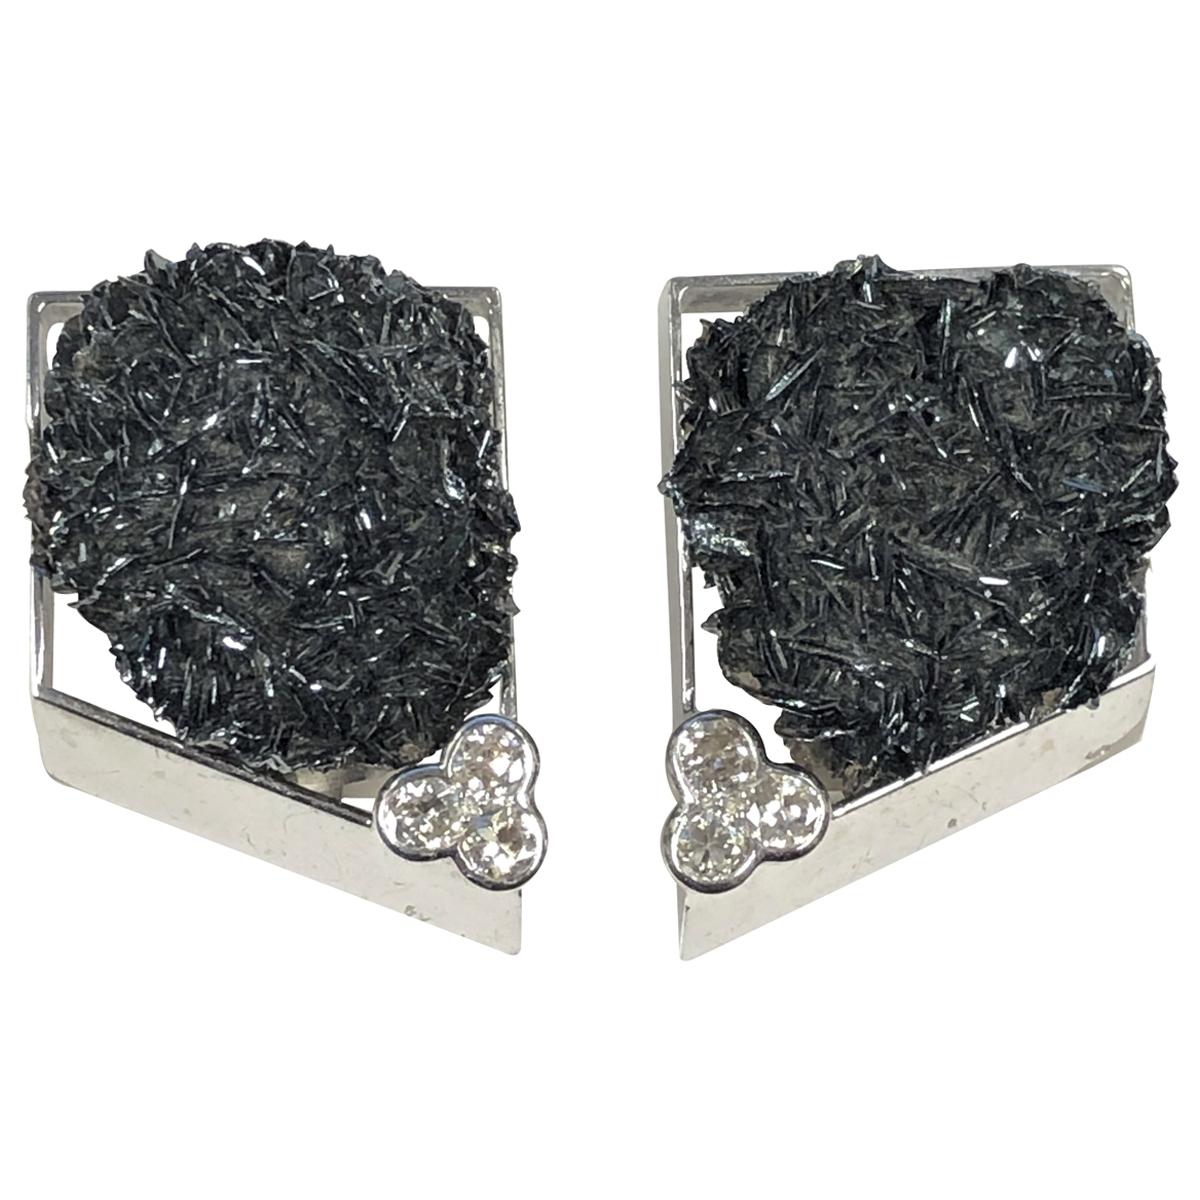 Thierry Vendome Large White Gold Diamond and Hematite Earrings